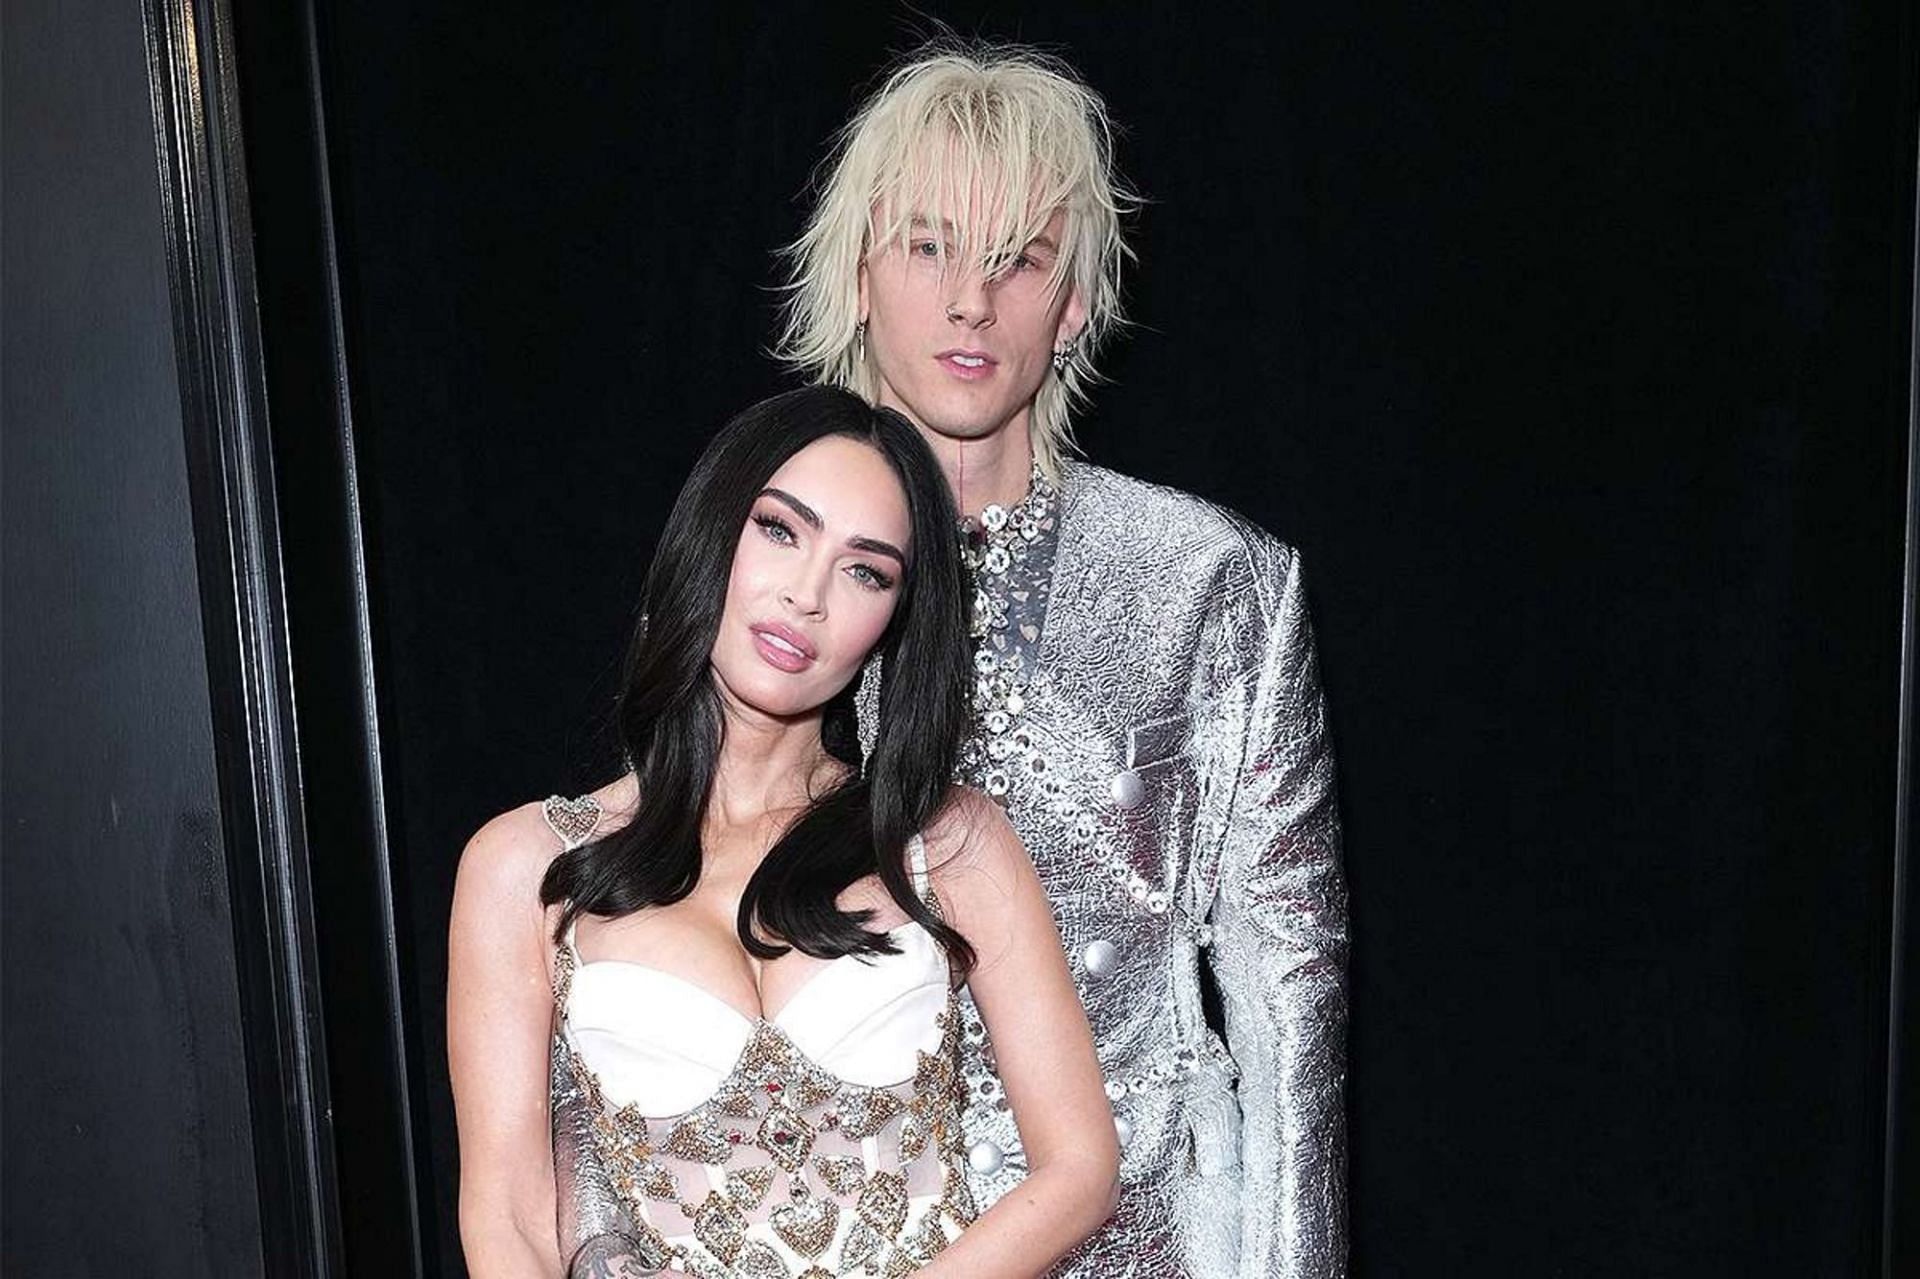 Machine Gun Kelly and Megan Fox at the Grammys (Image via Getty Images)